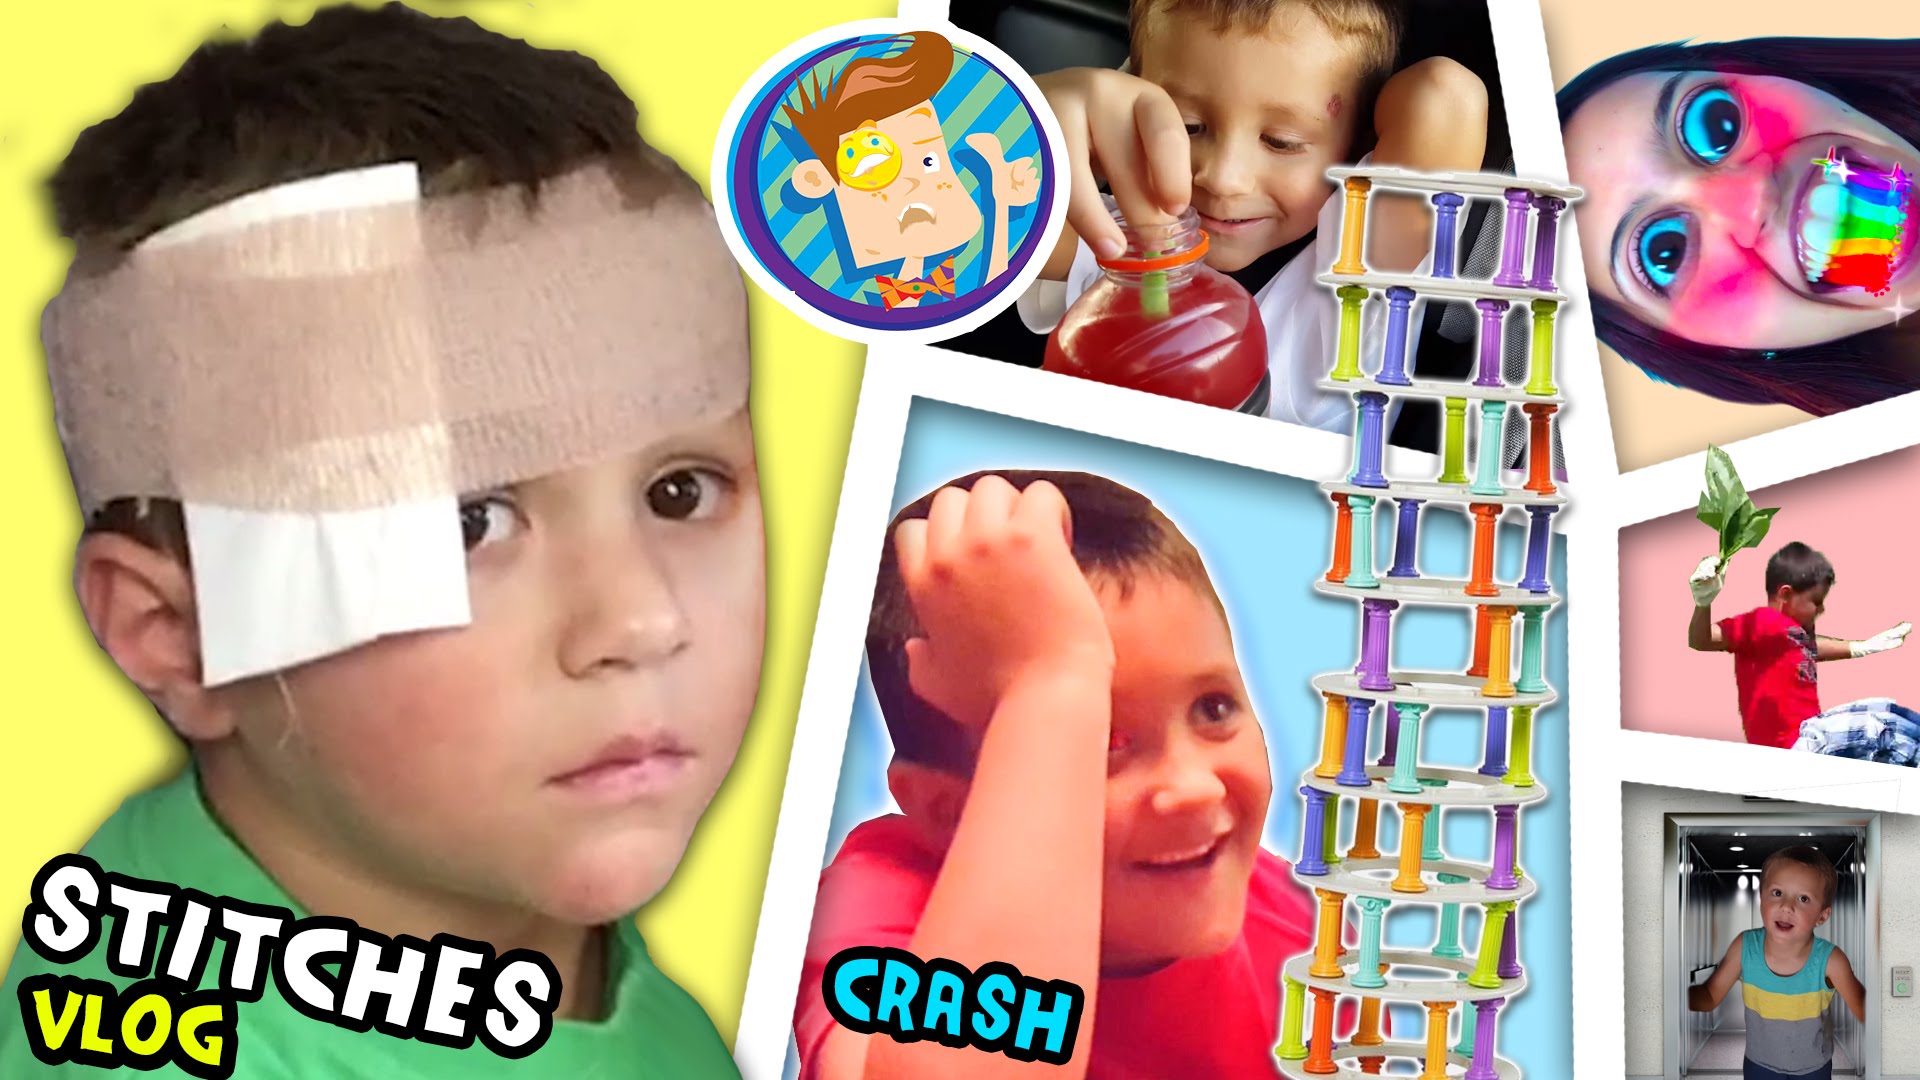 Emergency Room Visit / Crash Board Game & More - Funnel Vision Chase Gets Stitches , HD Wallpaper & Backgrounds